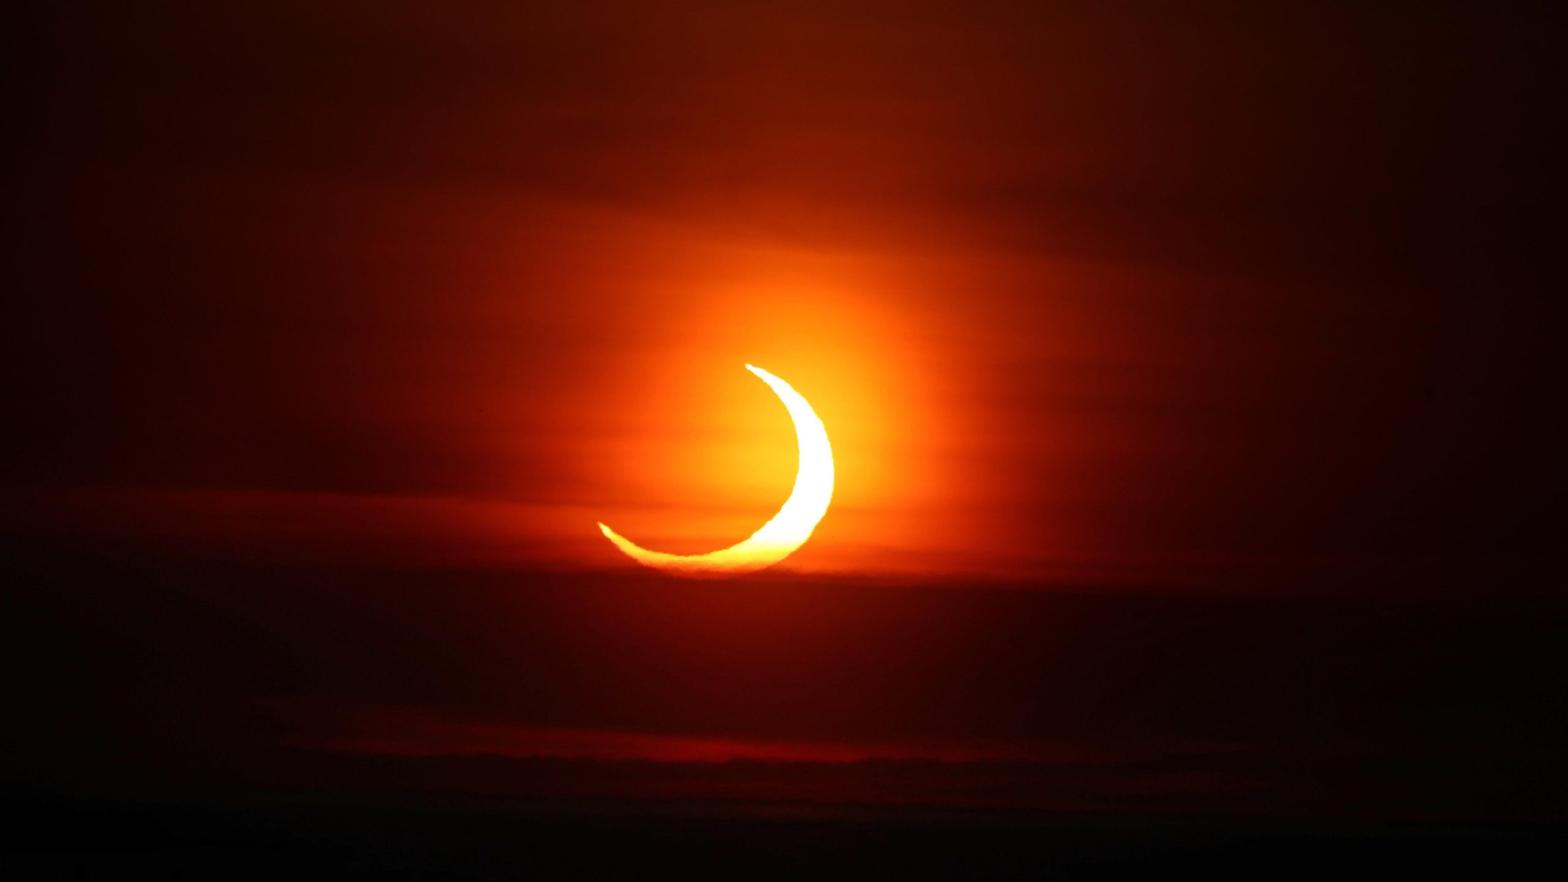 The sunrise eclipse as seen from Toronto, Canada on June 20, 2021. (Photo: Steve Russell/Toronto Star via Getty Images, Getty Images)